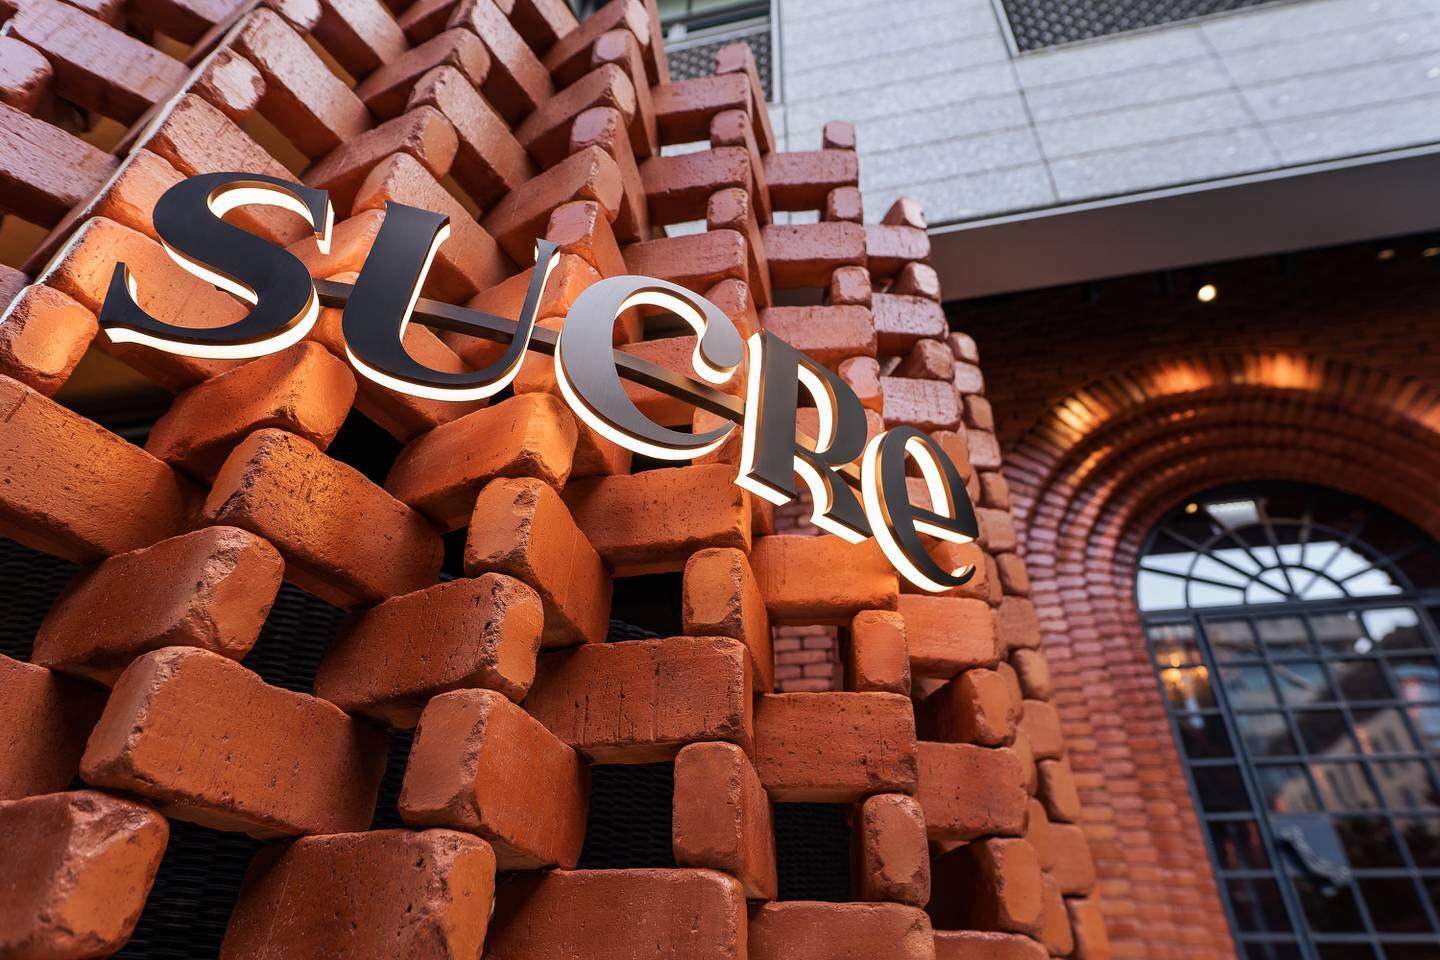 Sucre, one of Latin America's top restaurants, opened a branch in Dubai in early 2022. Photo: Sucre